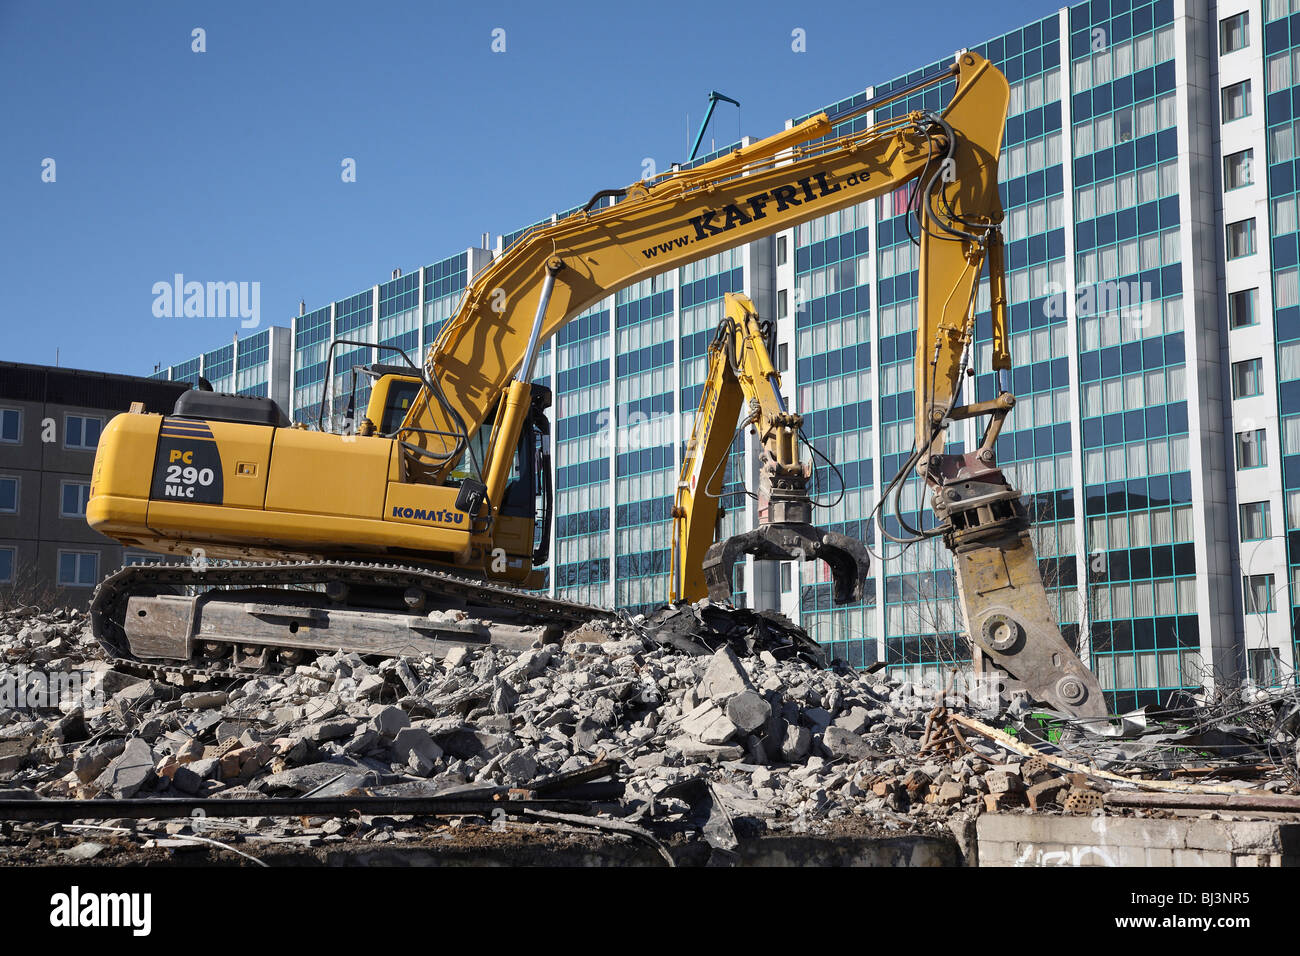 Demolition of a building made of precast concrete slabs, Berlin, Germany Stock Photo